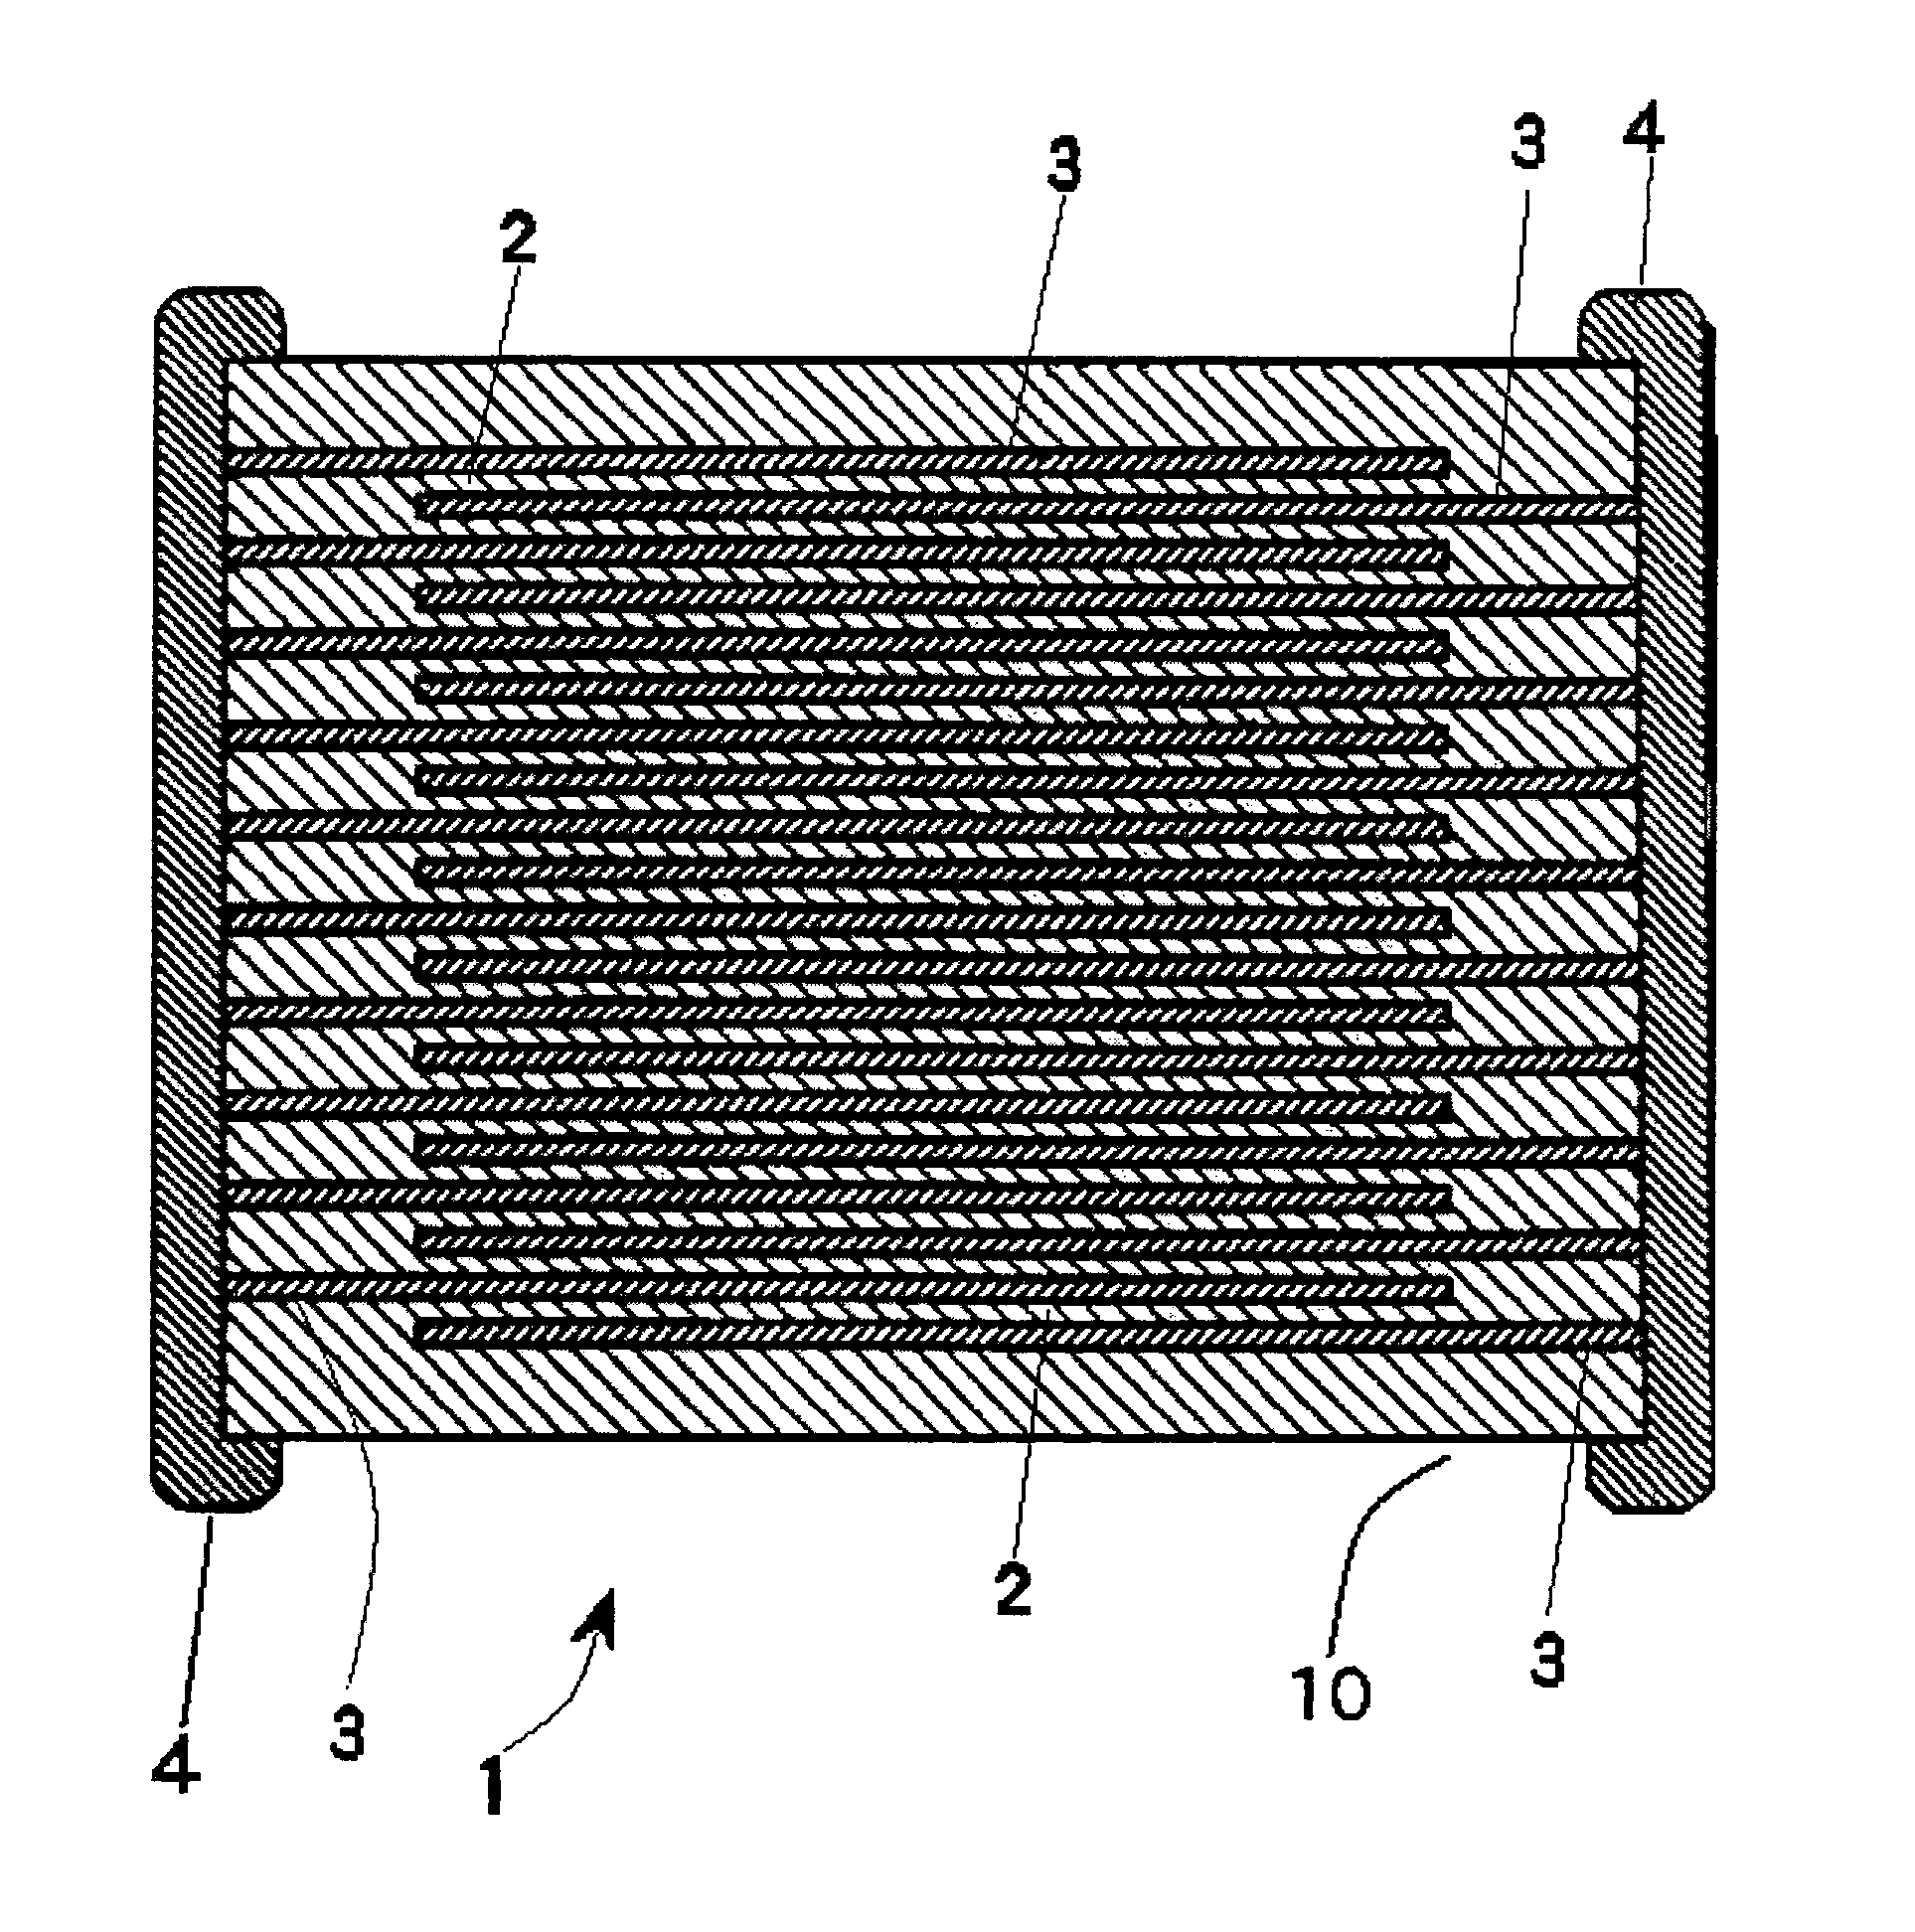 COG dielectric composition for use with copper electrodes